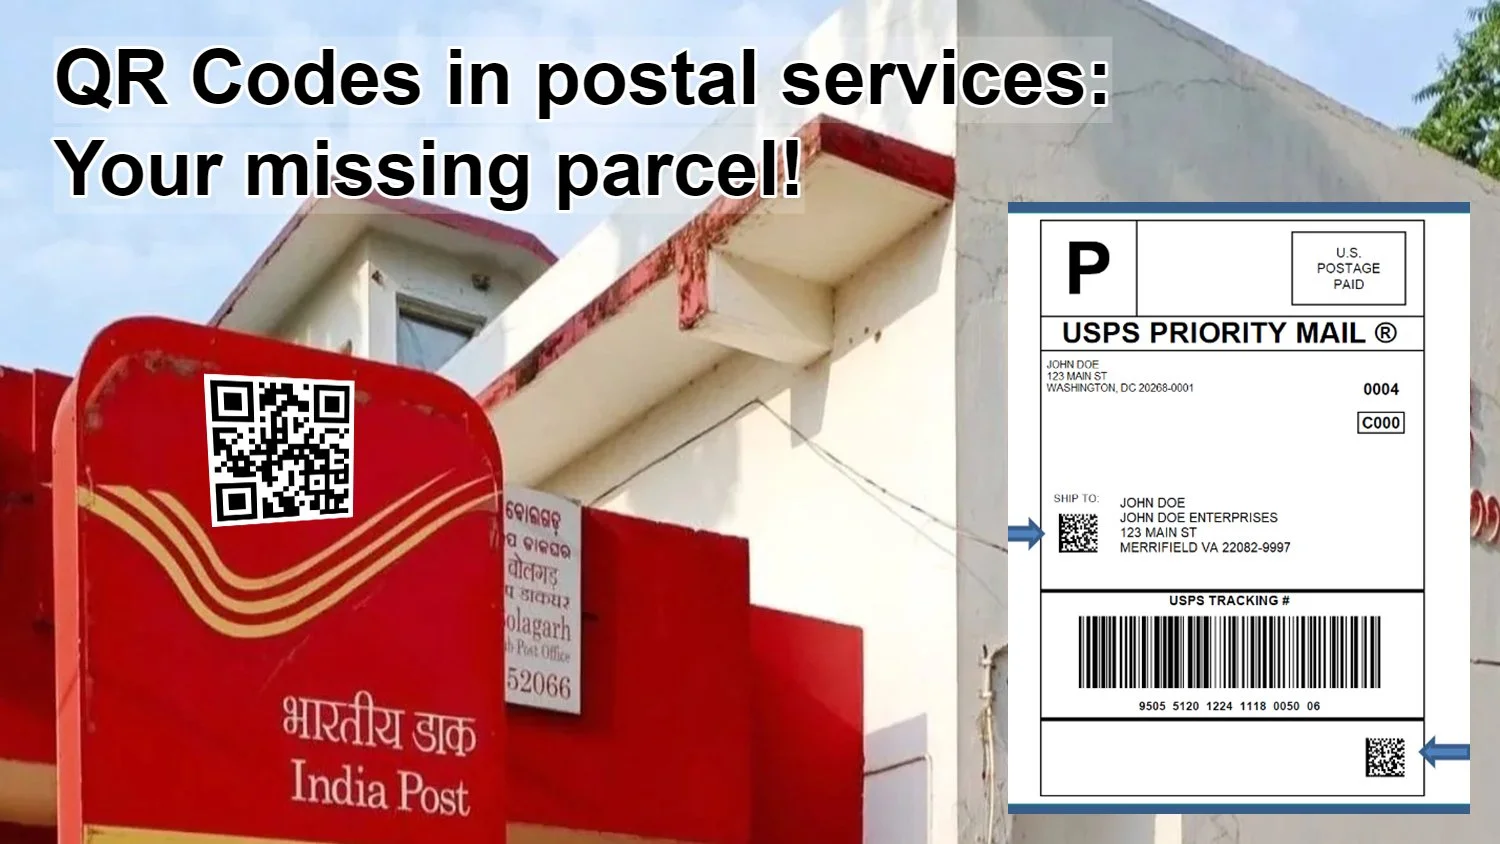 QR Codes in postal services